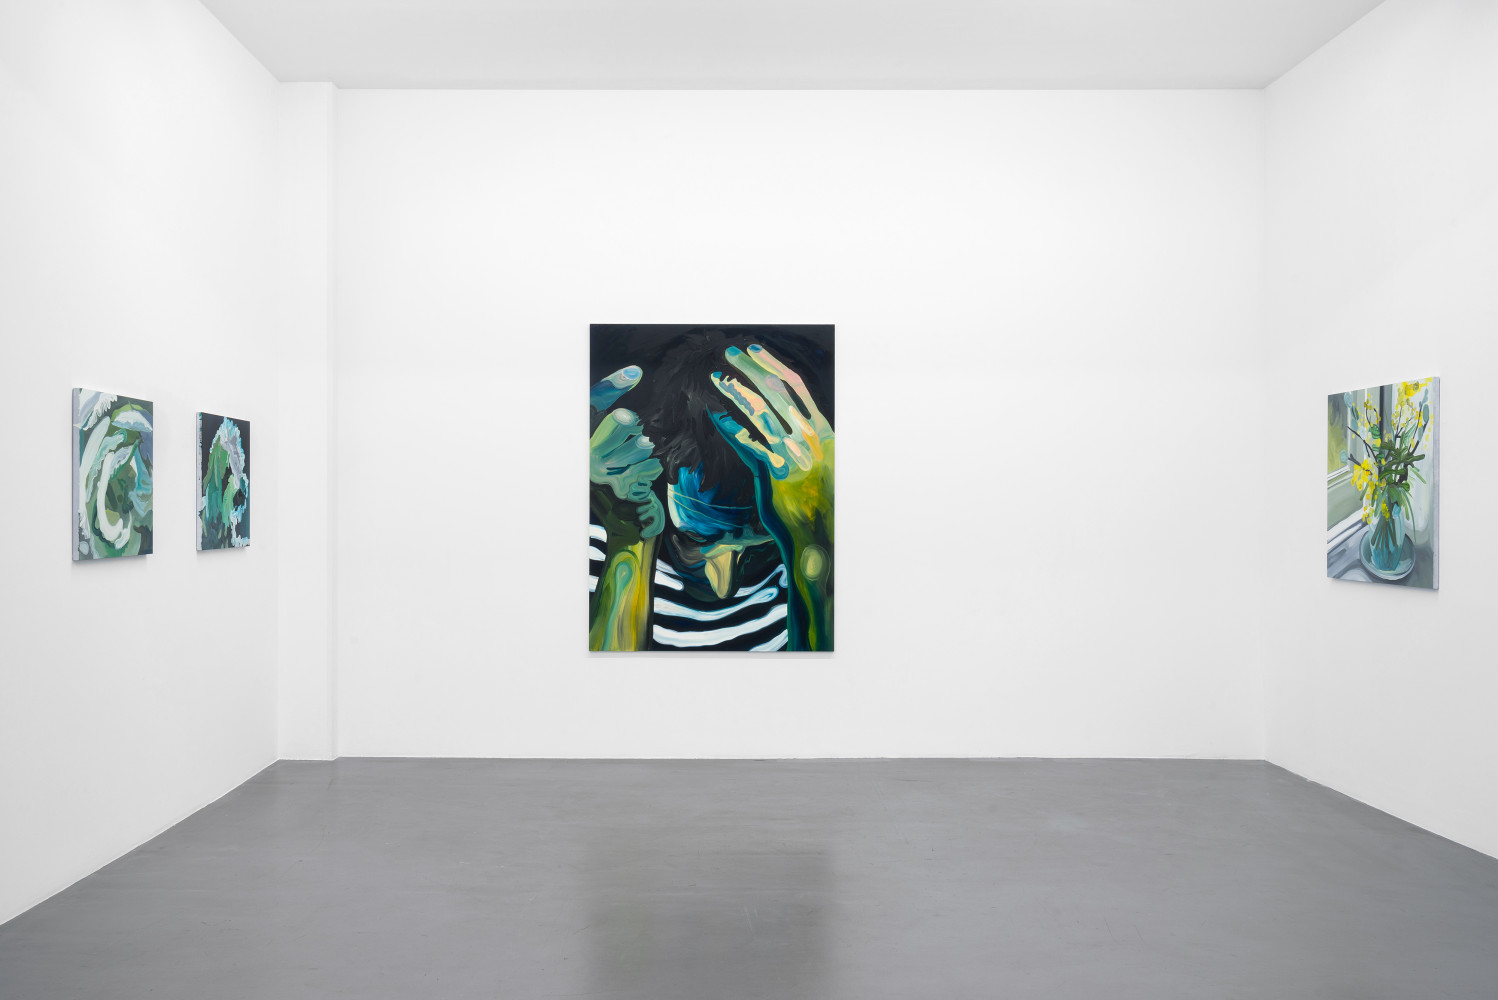 Clare Woods, Installation view, 2020